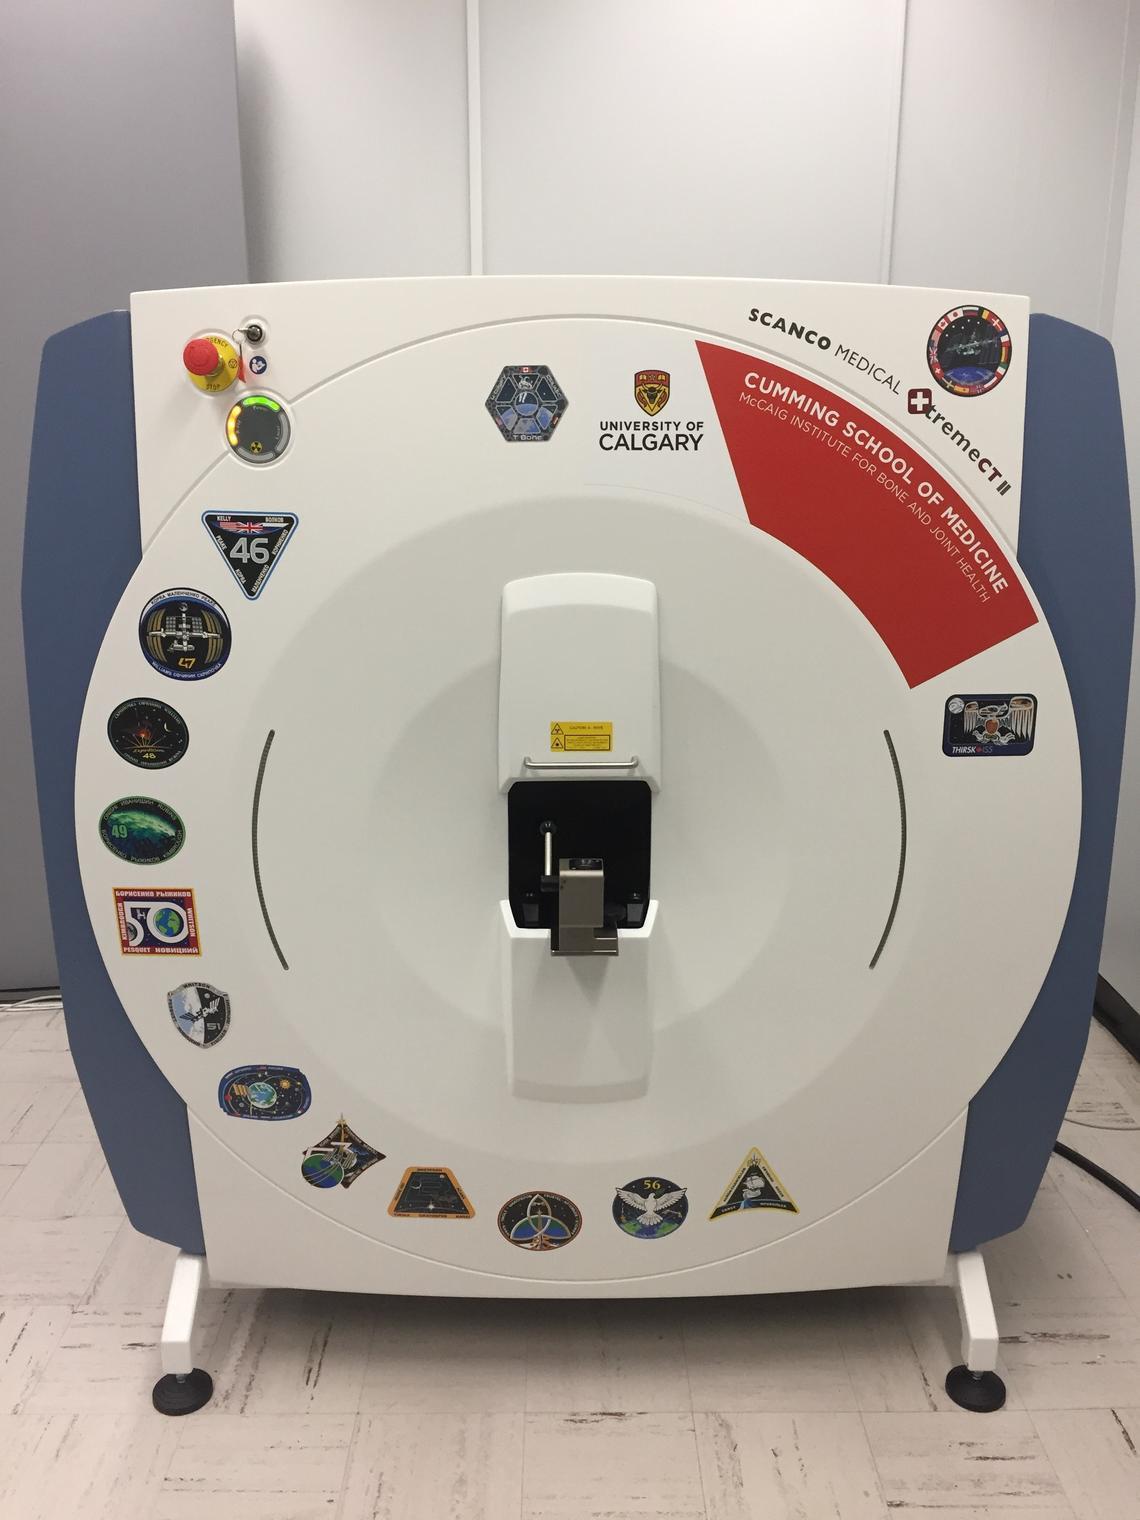 3D high resolution peripheral quantitative computed tomography (HR-pQCT) scanner